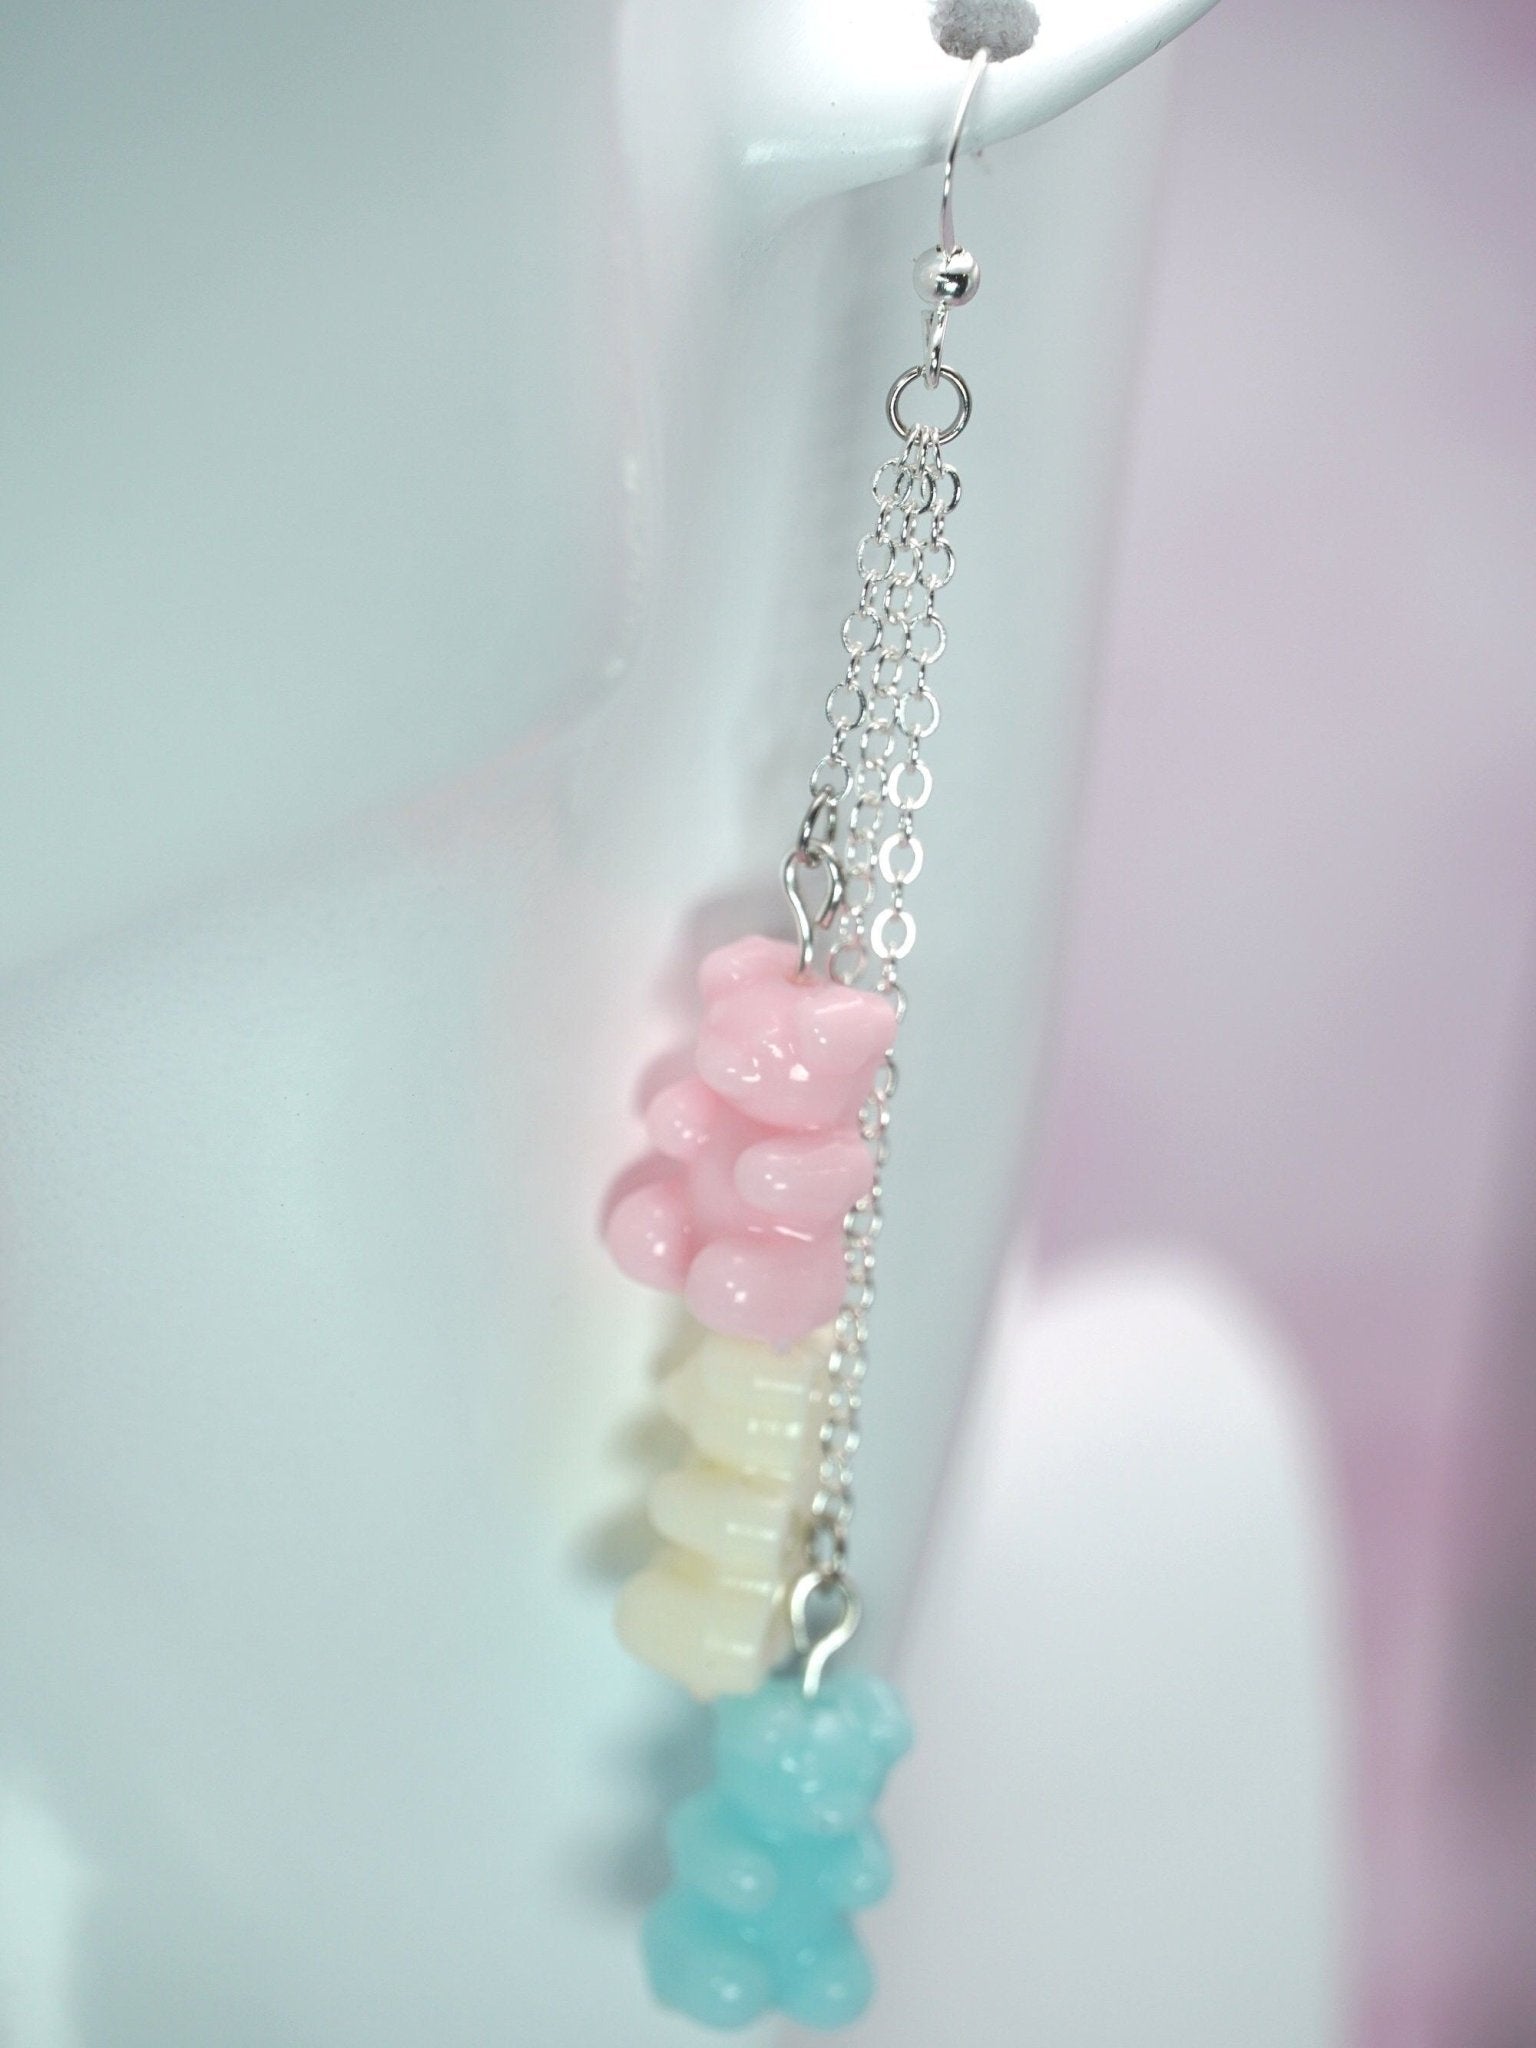 Trans Pride Gummy Bear Earrings, Pink, White and Baby Blue Gummy Bears suspended on silver chains. Perfect for Pride Month 2024. - Dekowaii Jewelry Company